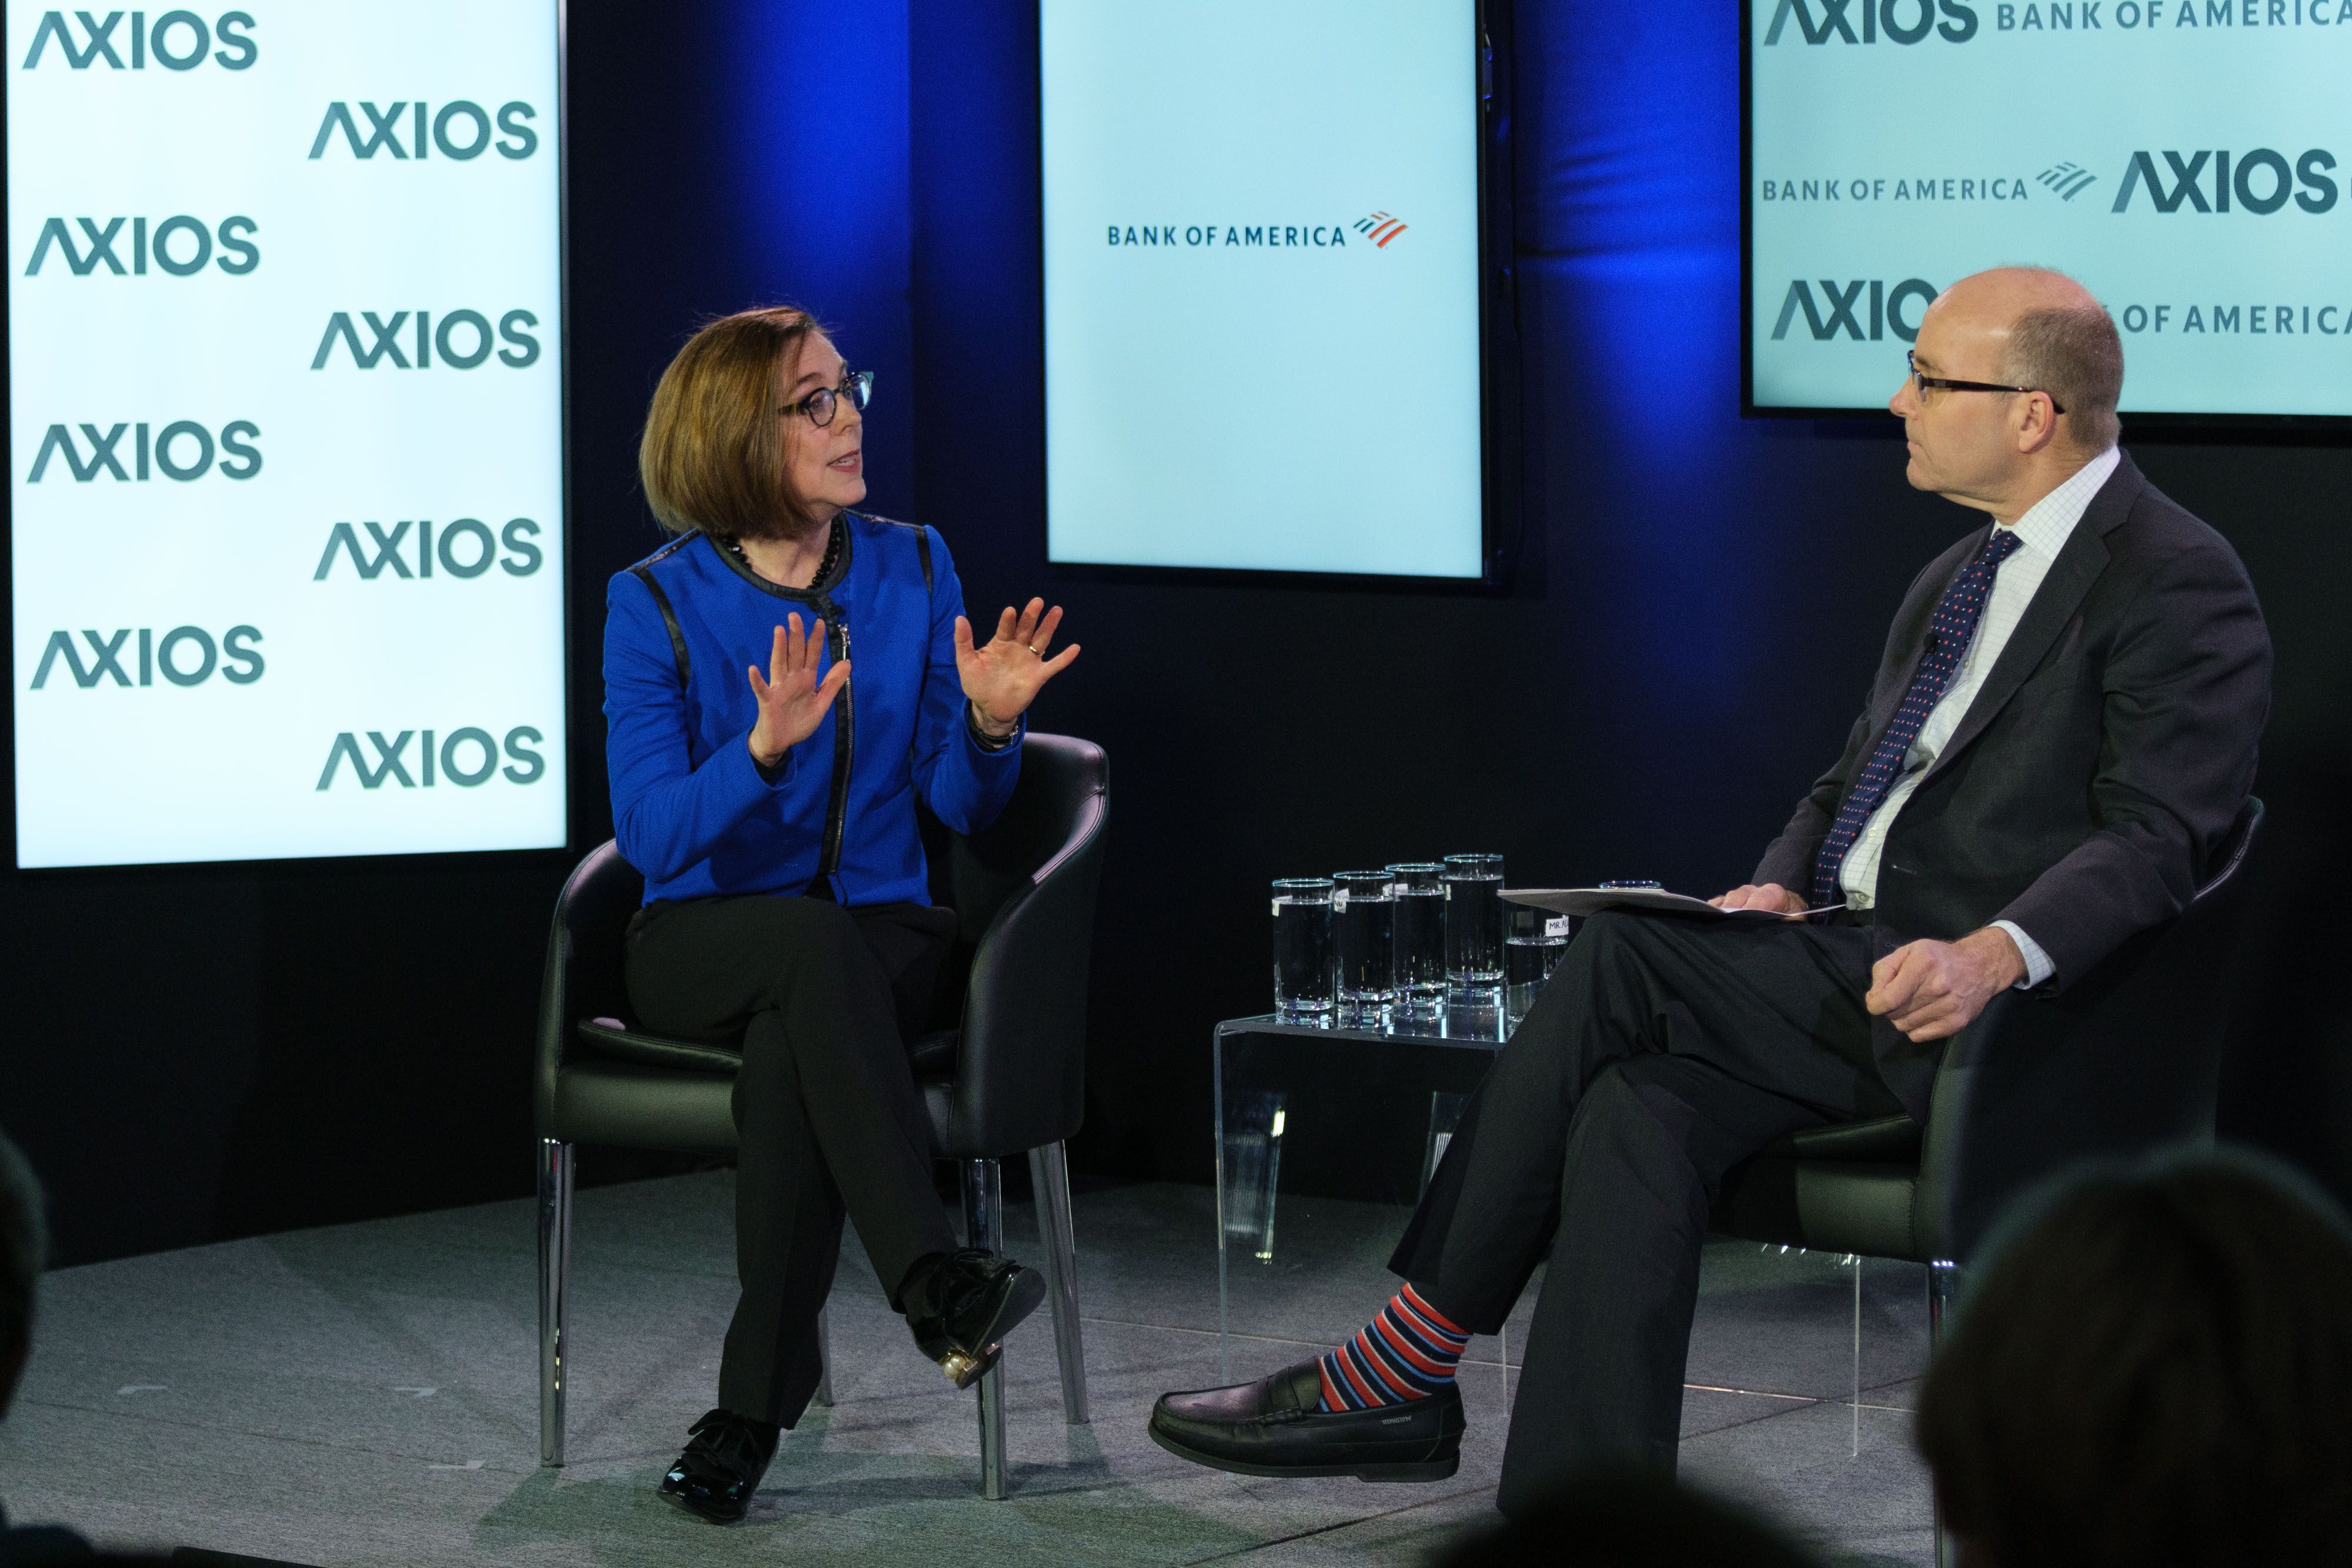 Oregon Governor Kate Brown and Axios Executive Editor Mike Allen on the Axios stage